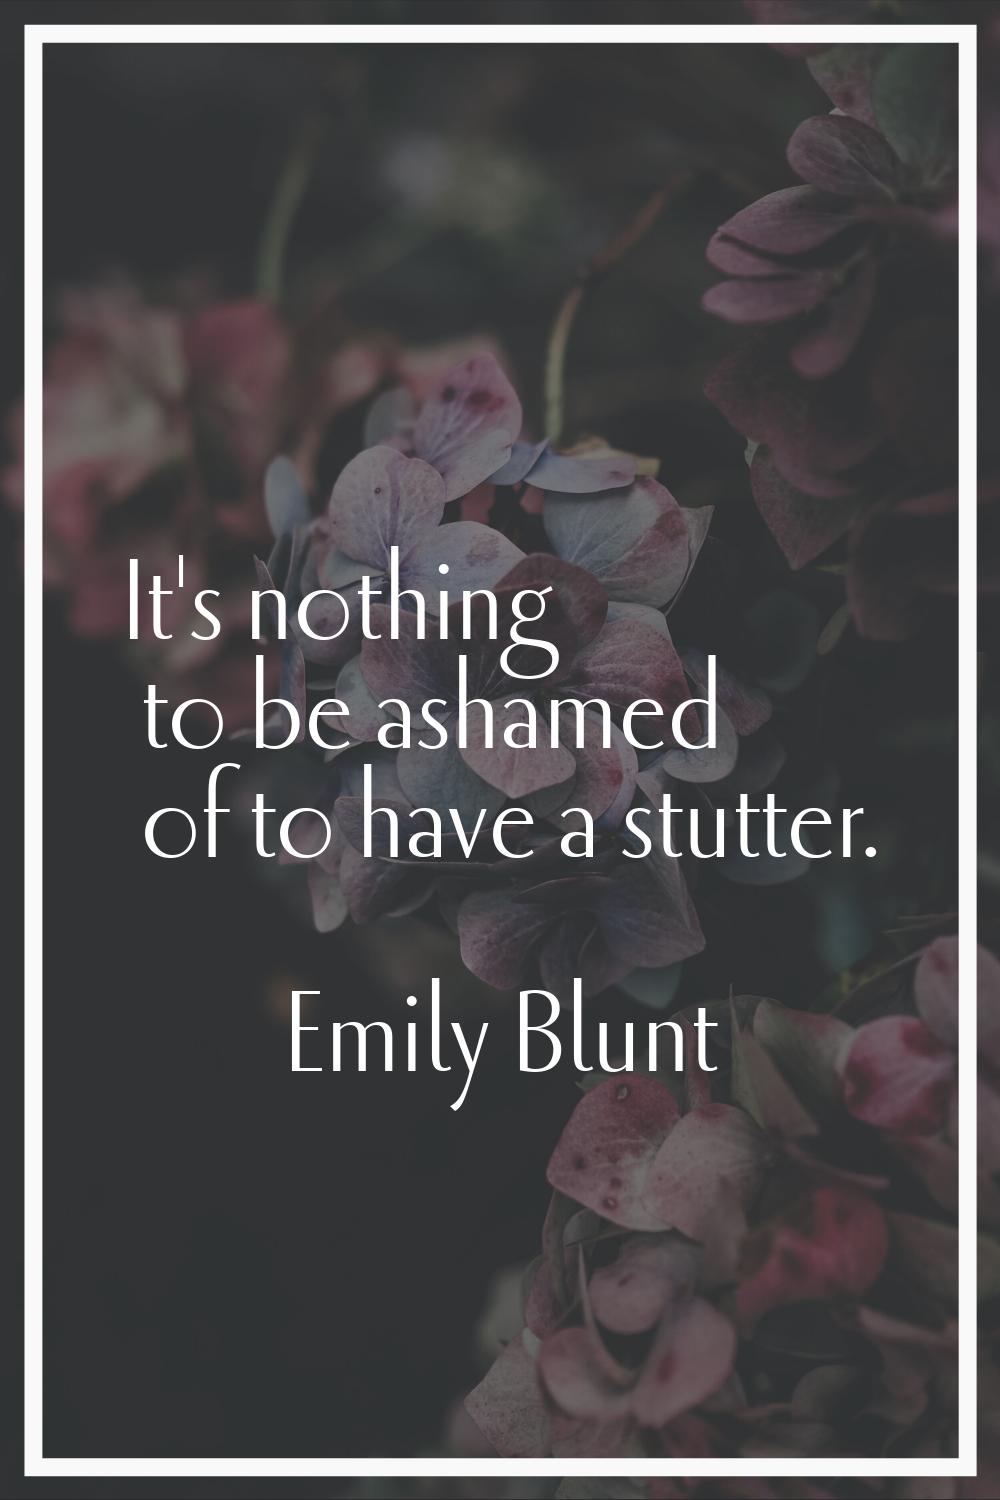 It's nothing to be ashamed of to have a stutter.